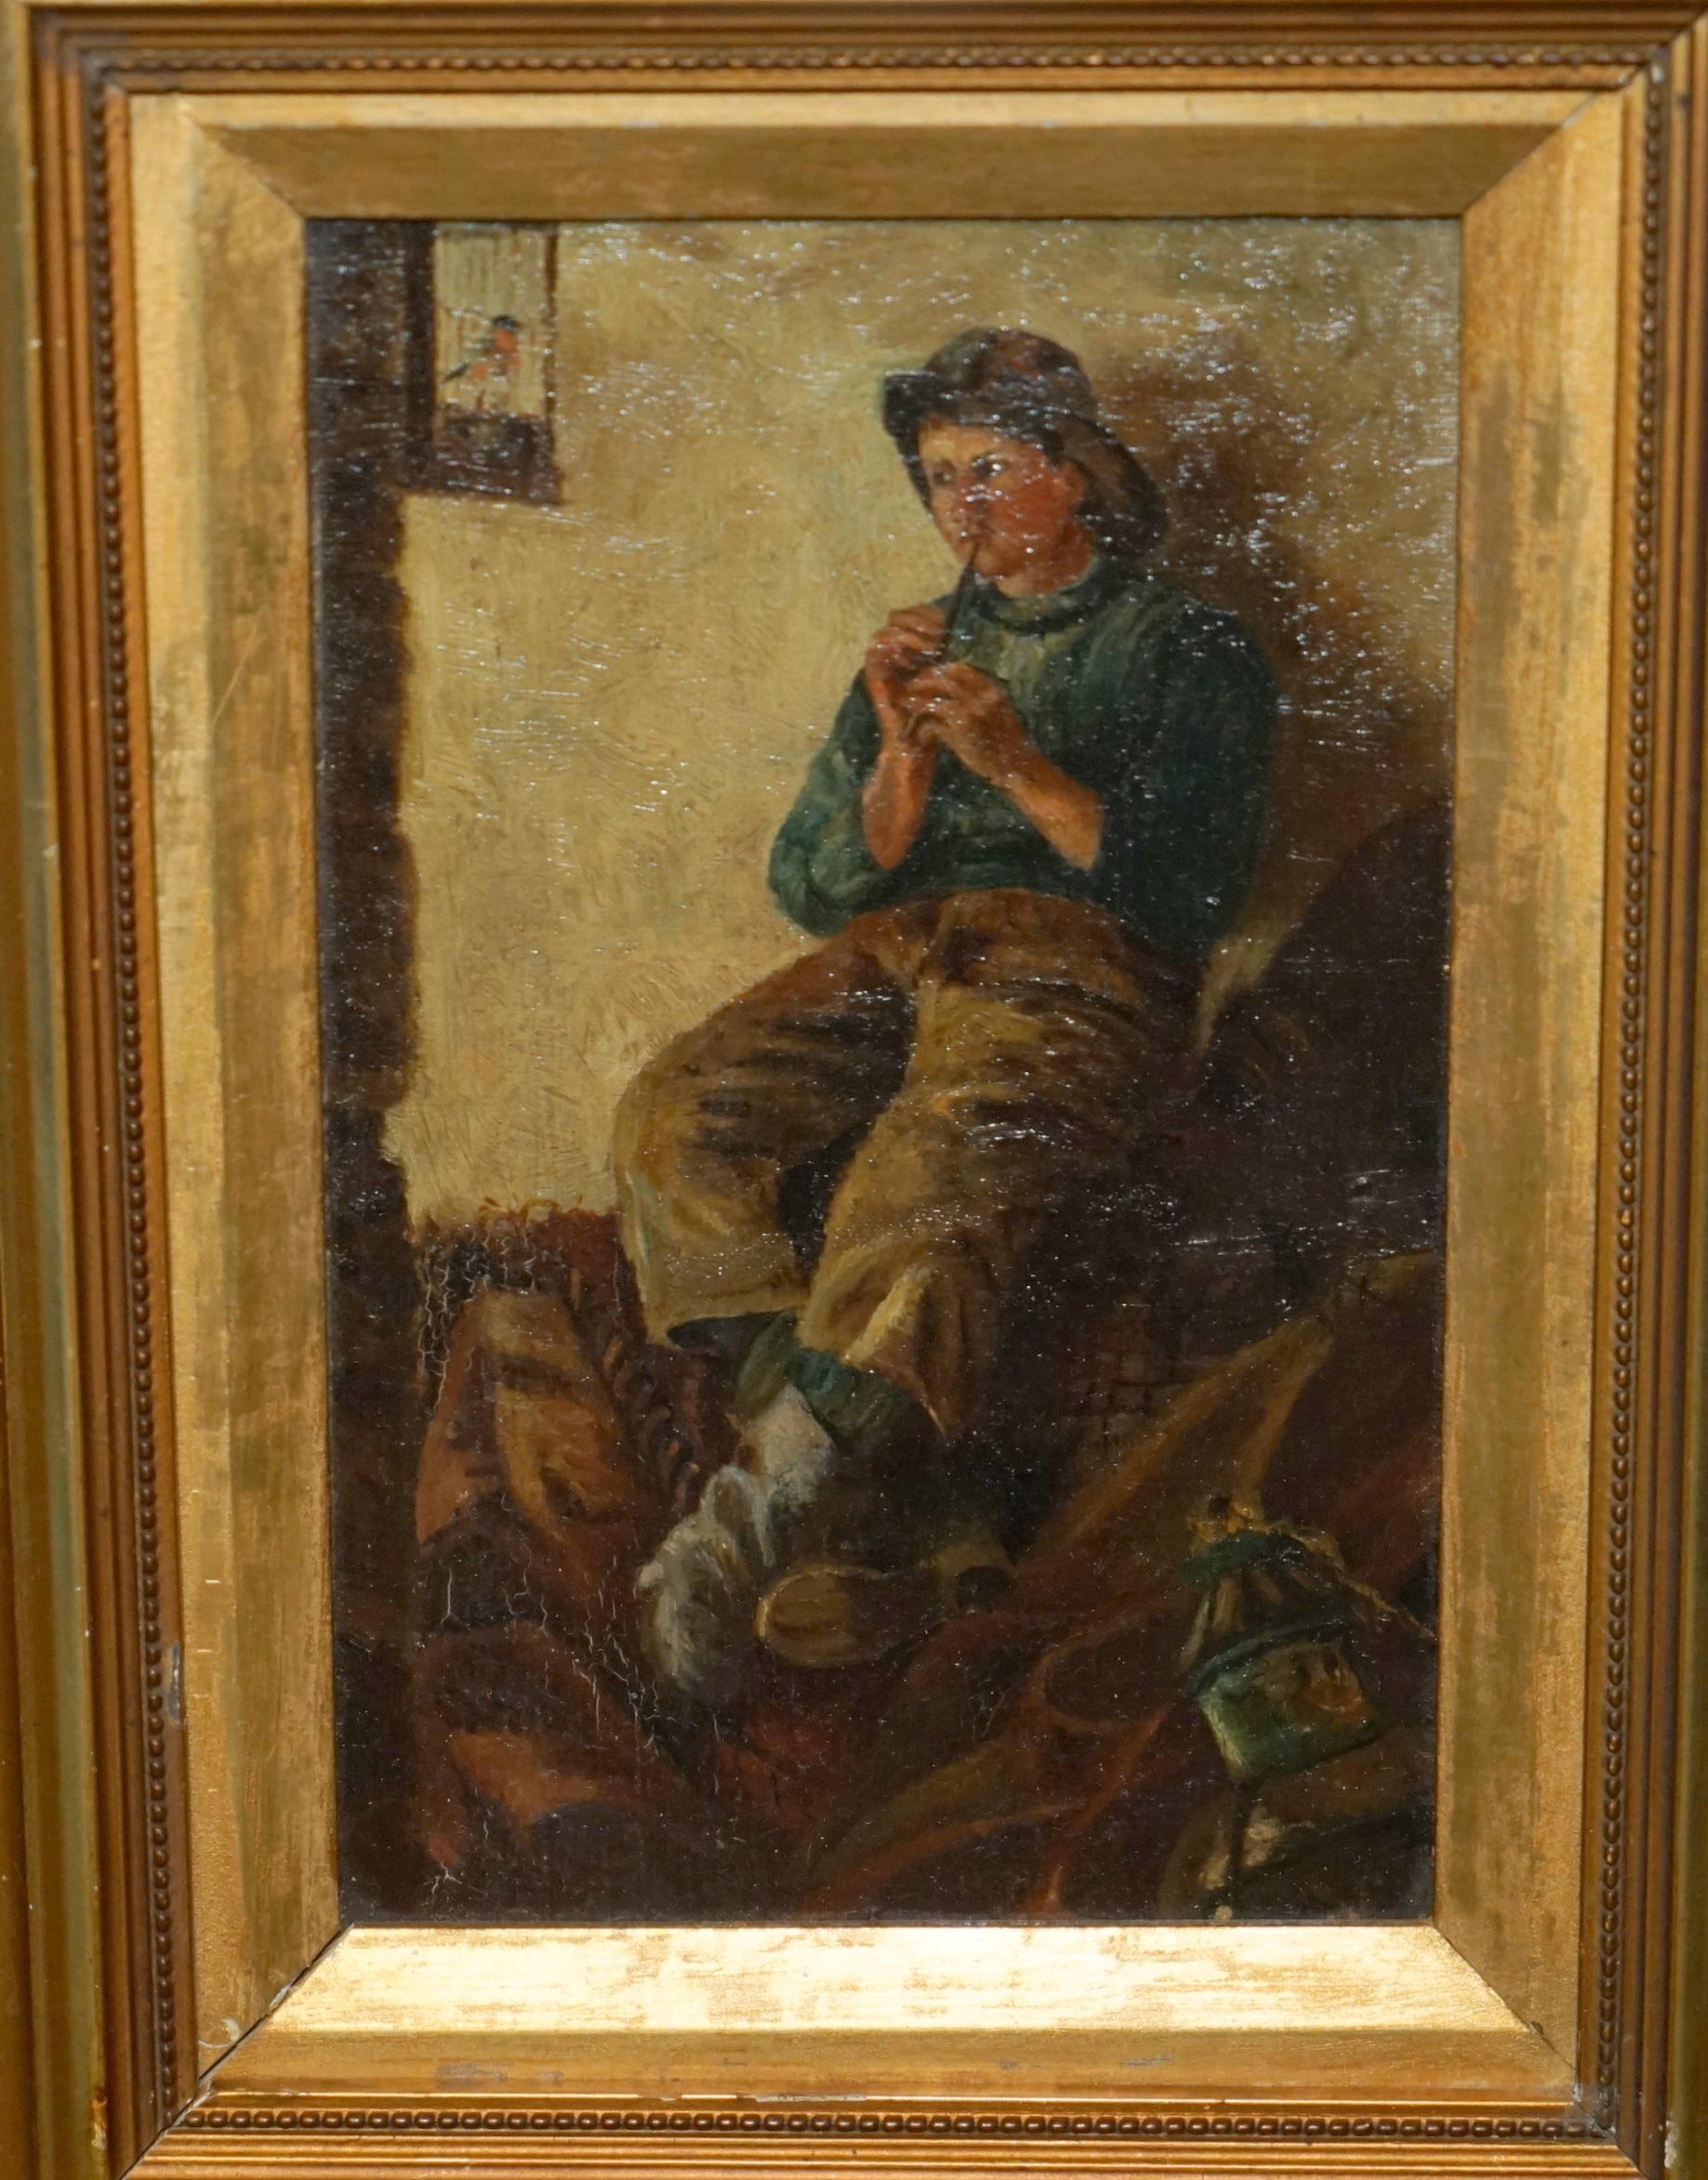 English SUBLIME ANTIQUE ViCTORIAN OIL PAINTING OF A YOUNG BOY (FISHERMAN) PLAYING A PIPE